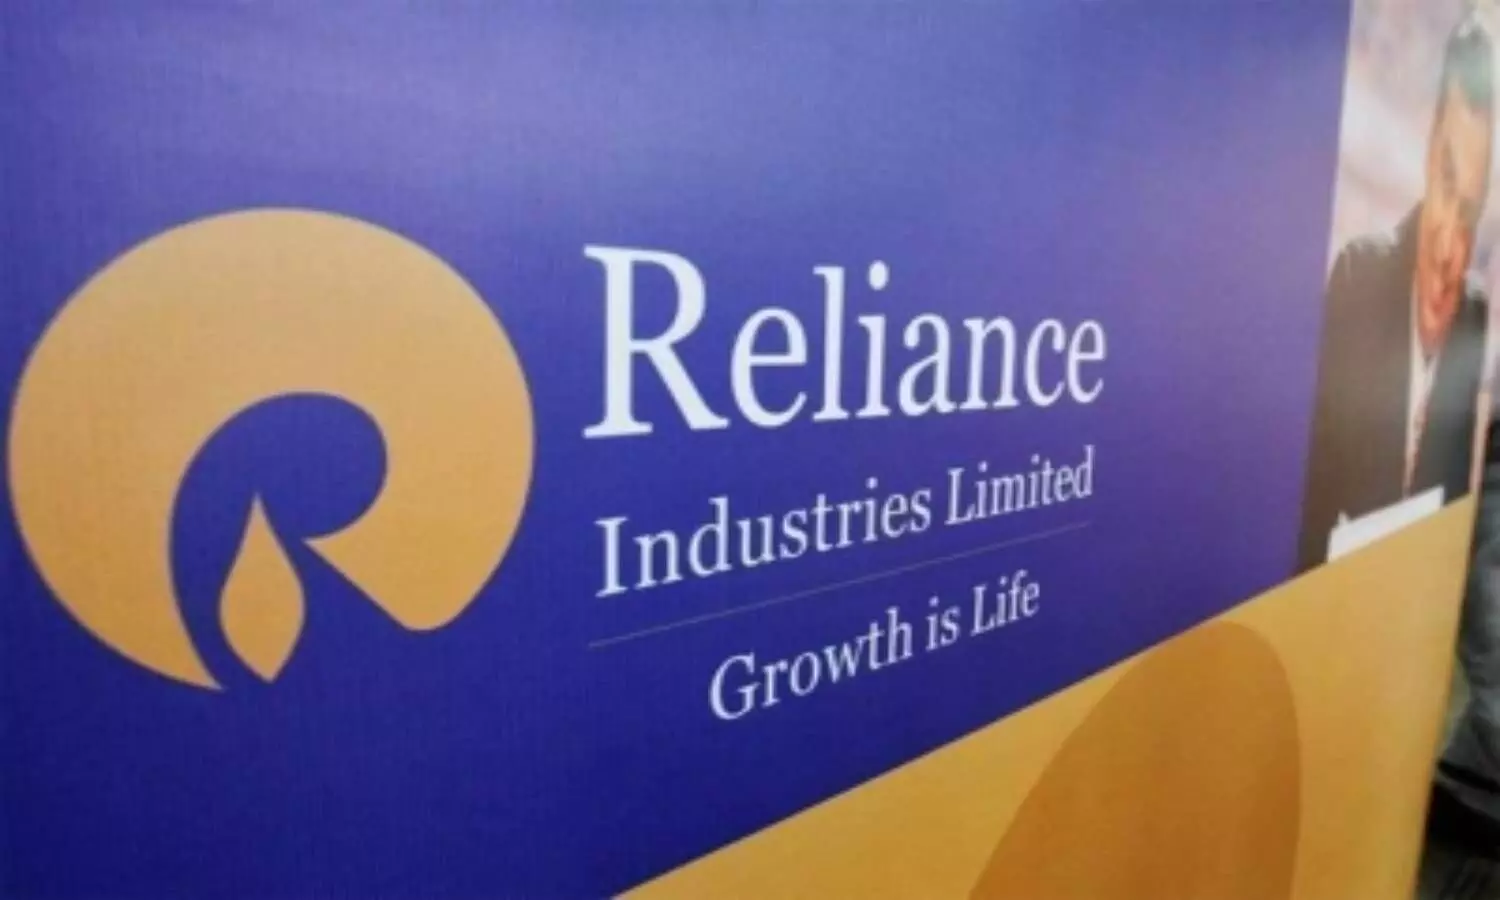 Appointment of Yasir Al Rumayyan has no connection with the contemplated transaction with Saudi Aramco: RIL